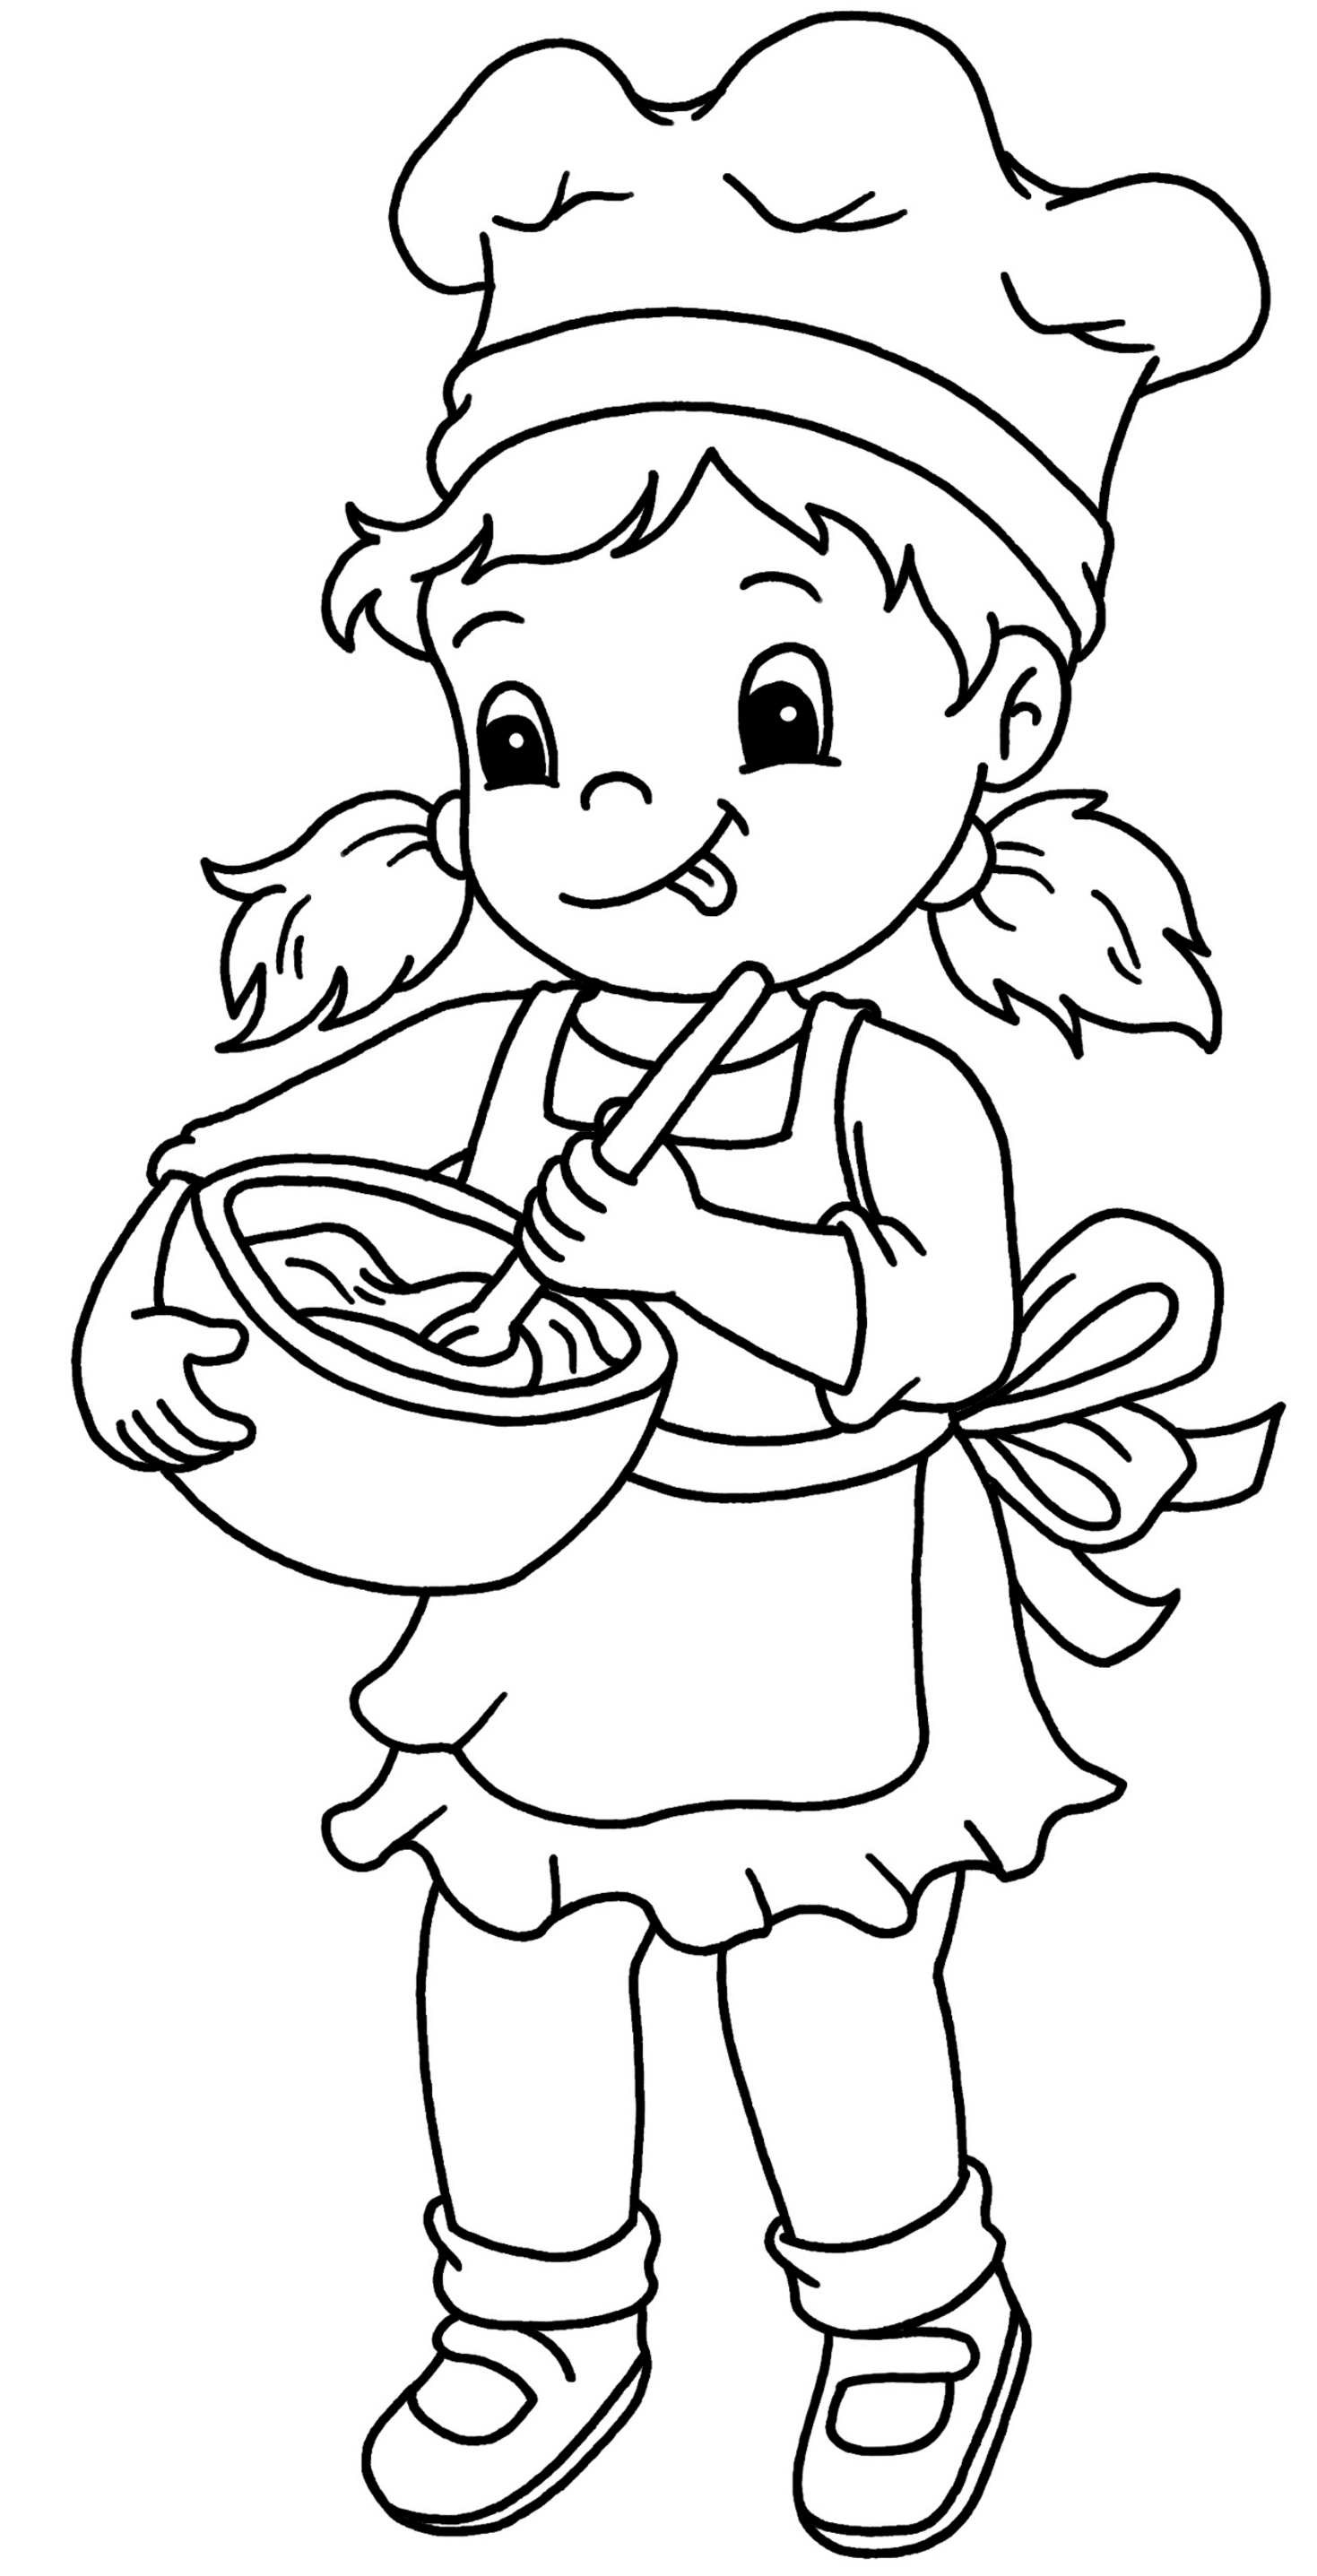 Download Baker #43 (Jobs) - Printable coloring pages